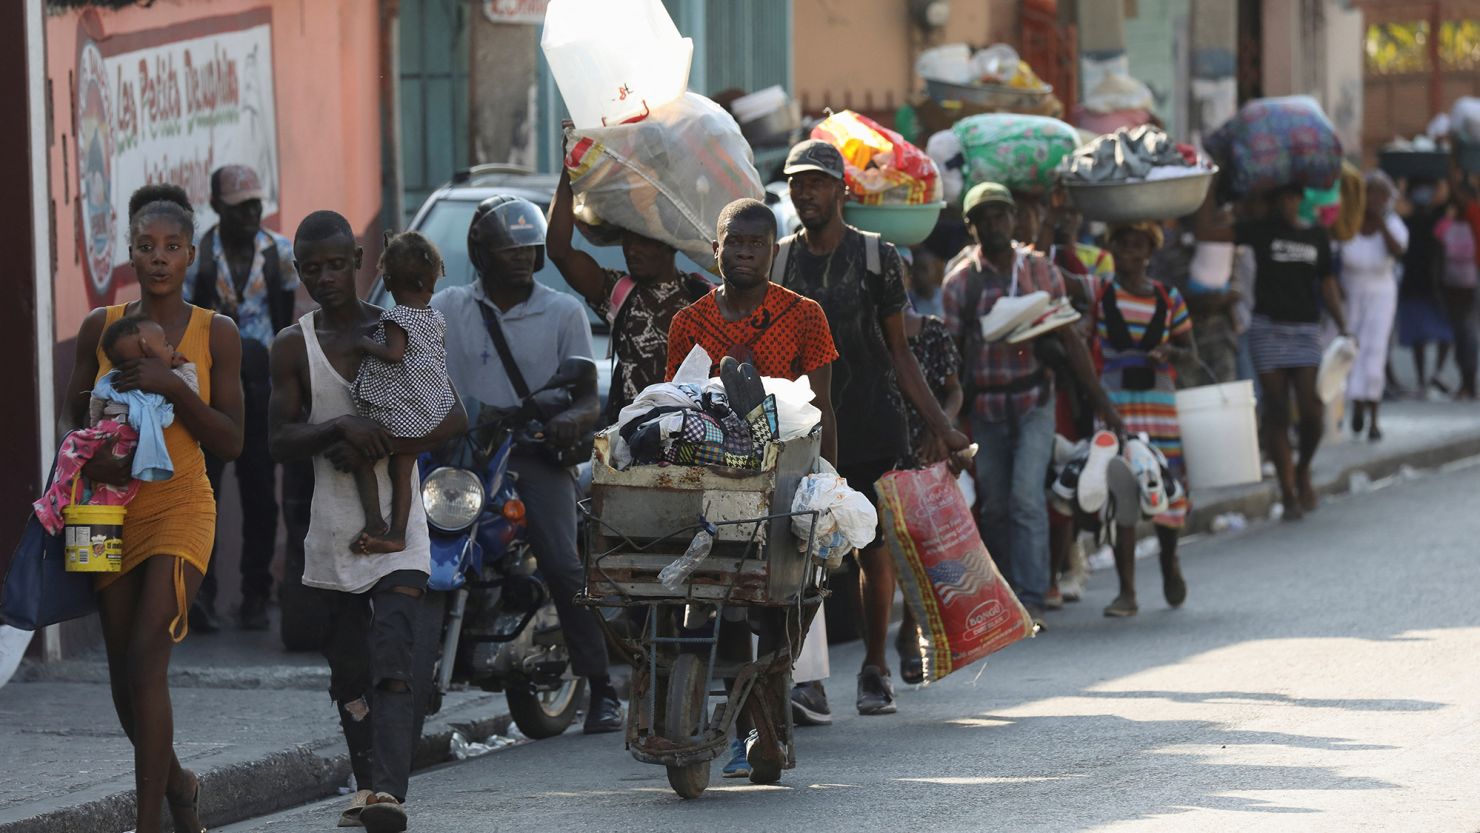 People flee their homes as police confront armed gangs in Port-au-Prince, Haiti, on February 29.